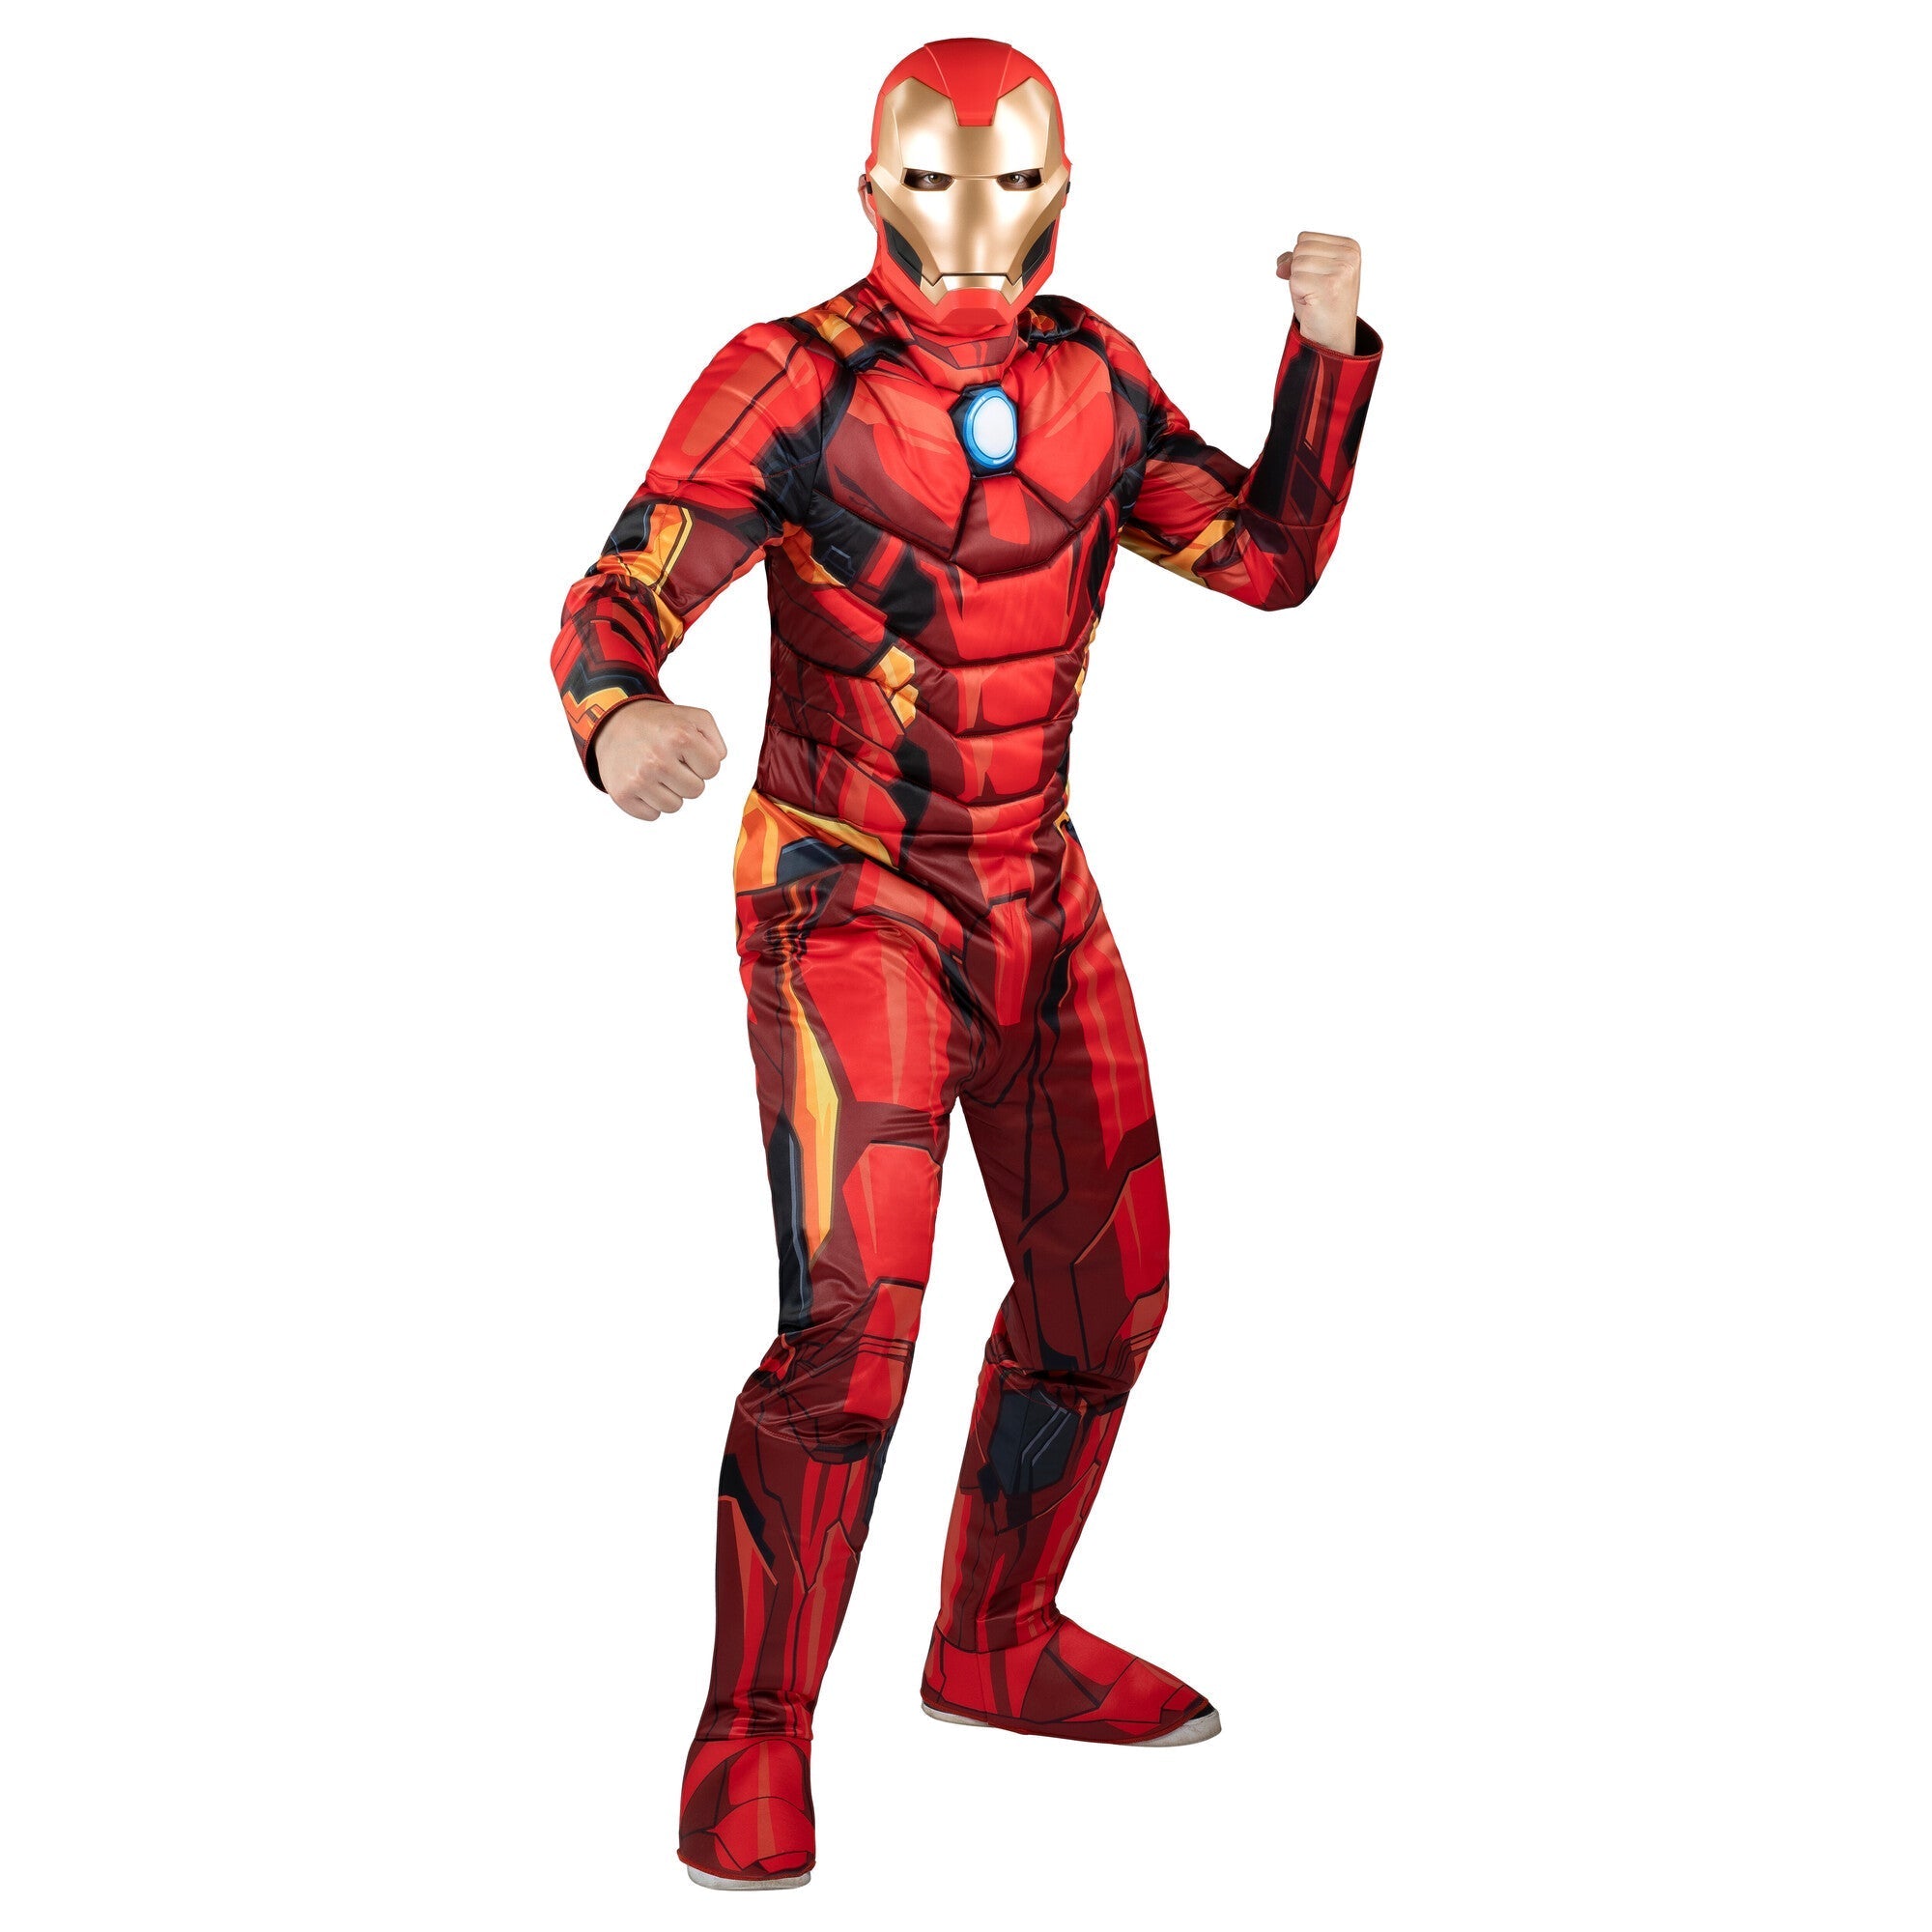 Marvel Iron Man Qualux Costume for Adults, Red Jumpsuit and Mask